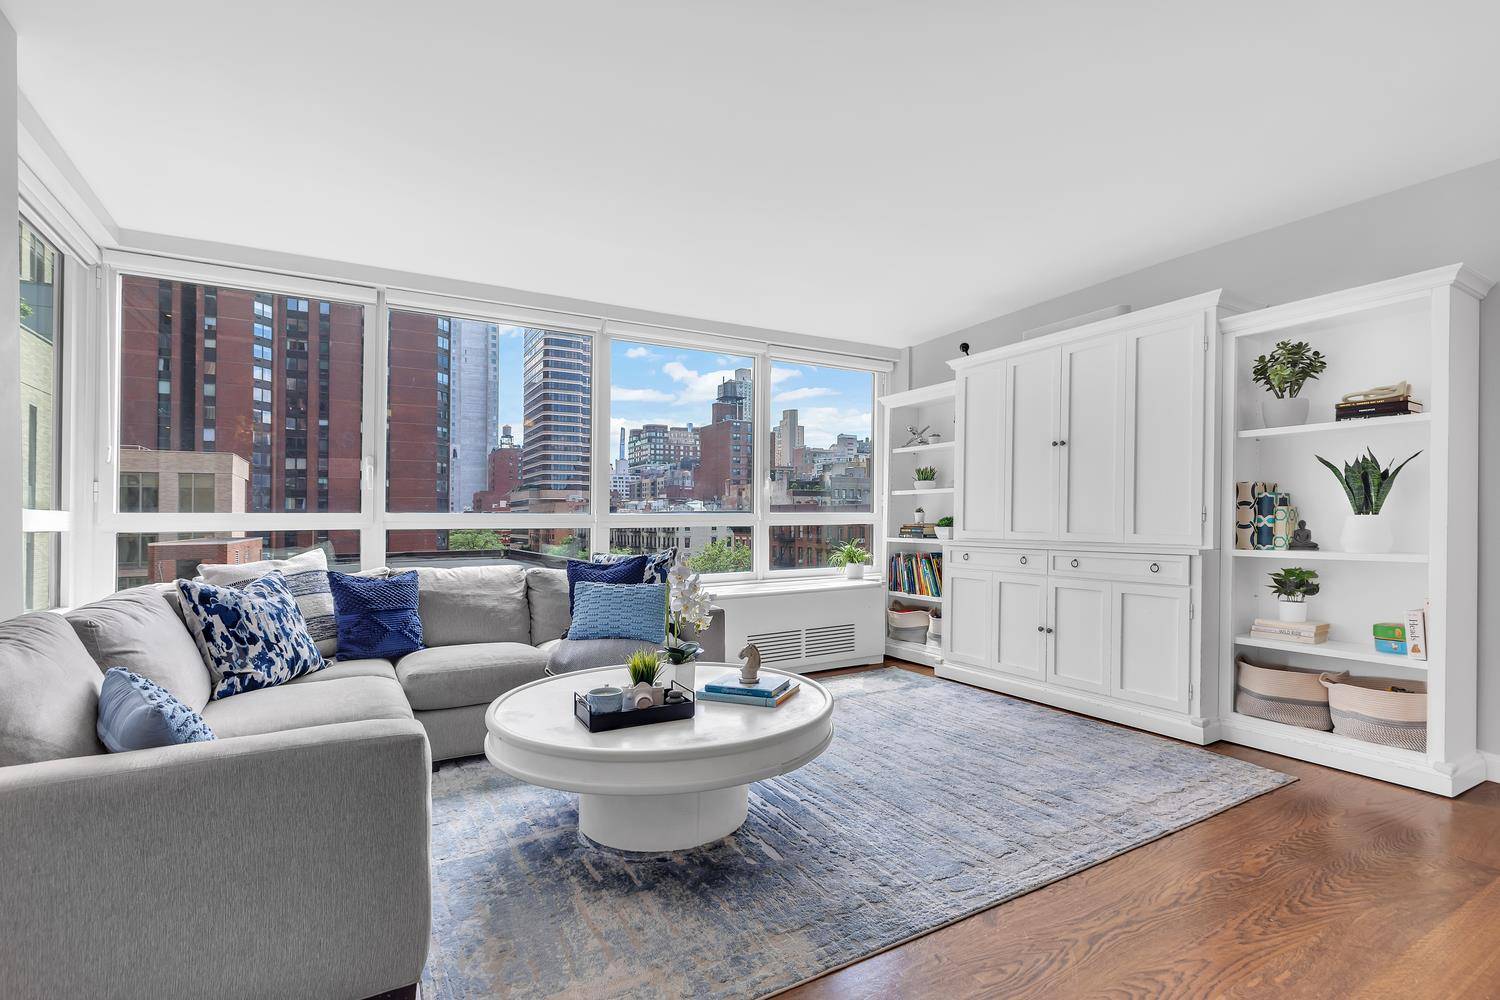 Welcome to Residence 601, a sun drenched two bedroom, two bathroom corner unit with great south and east facing views located in one of Carnegie Hill's best full service condominiums.